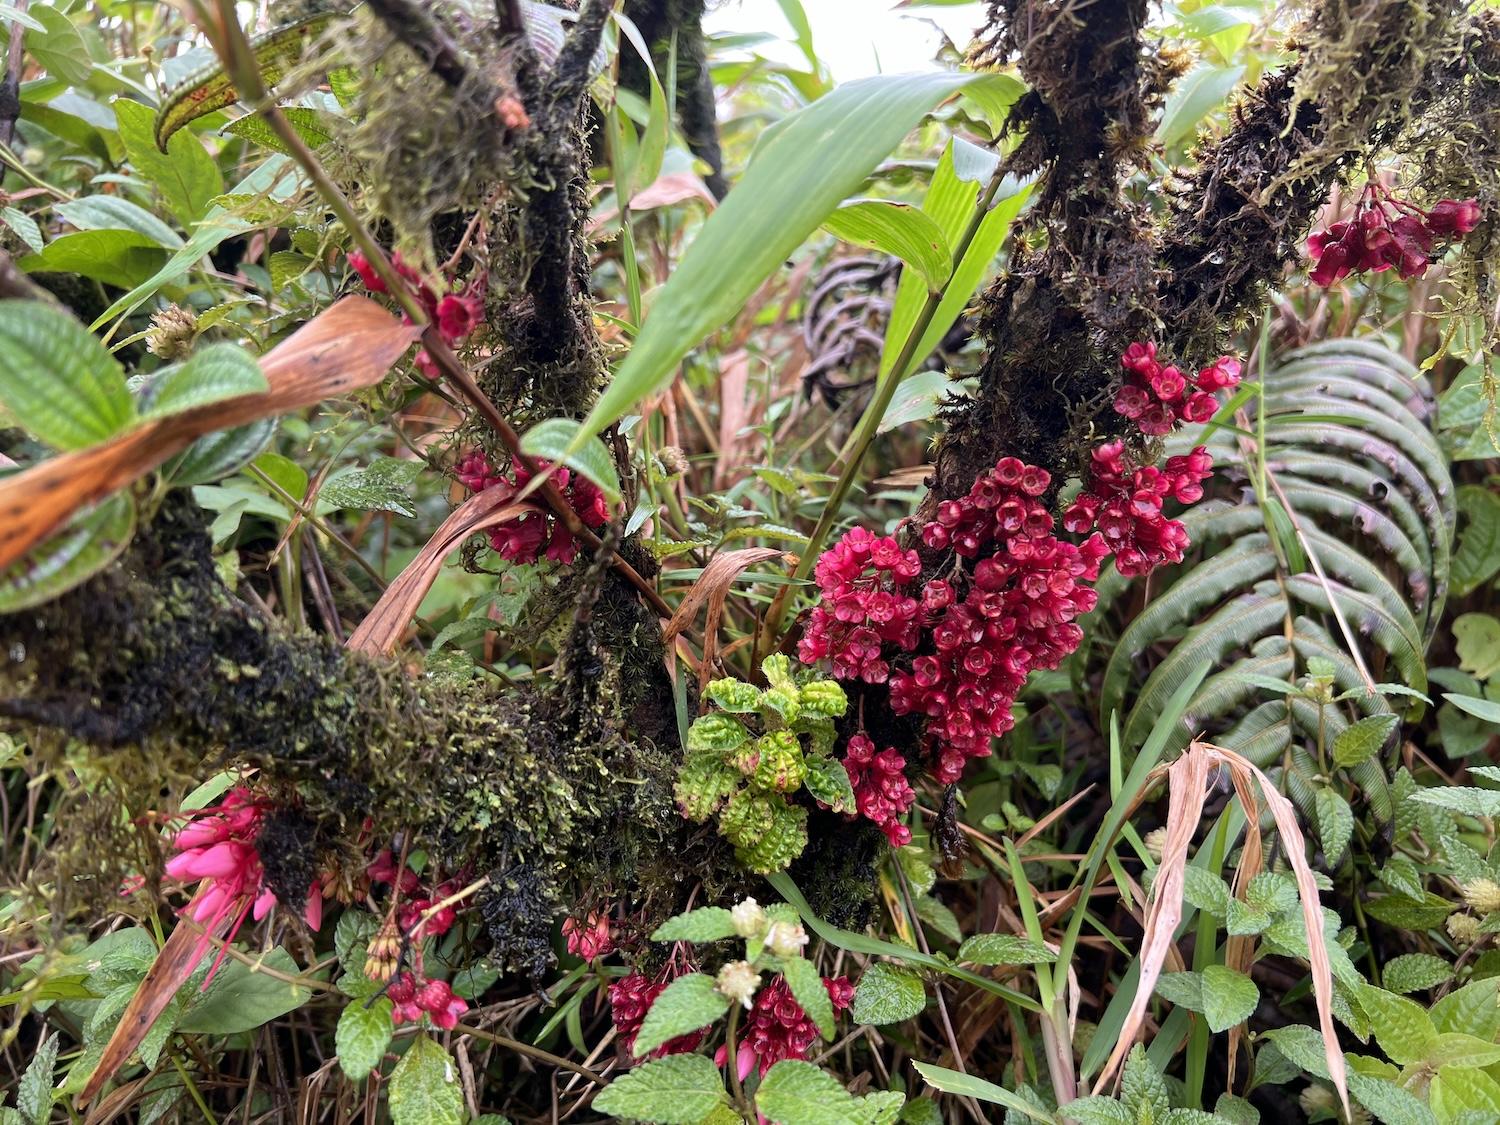 Some of the pretty, though likely invasive, flora on Mount Pelée.